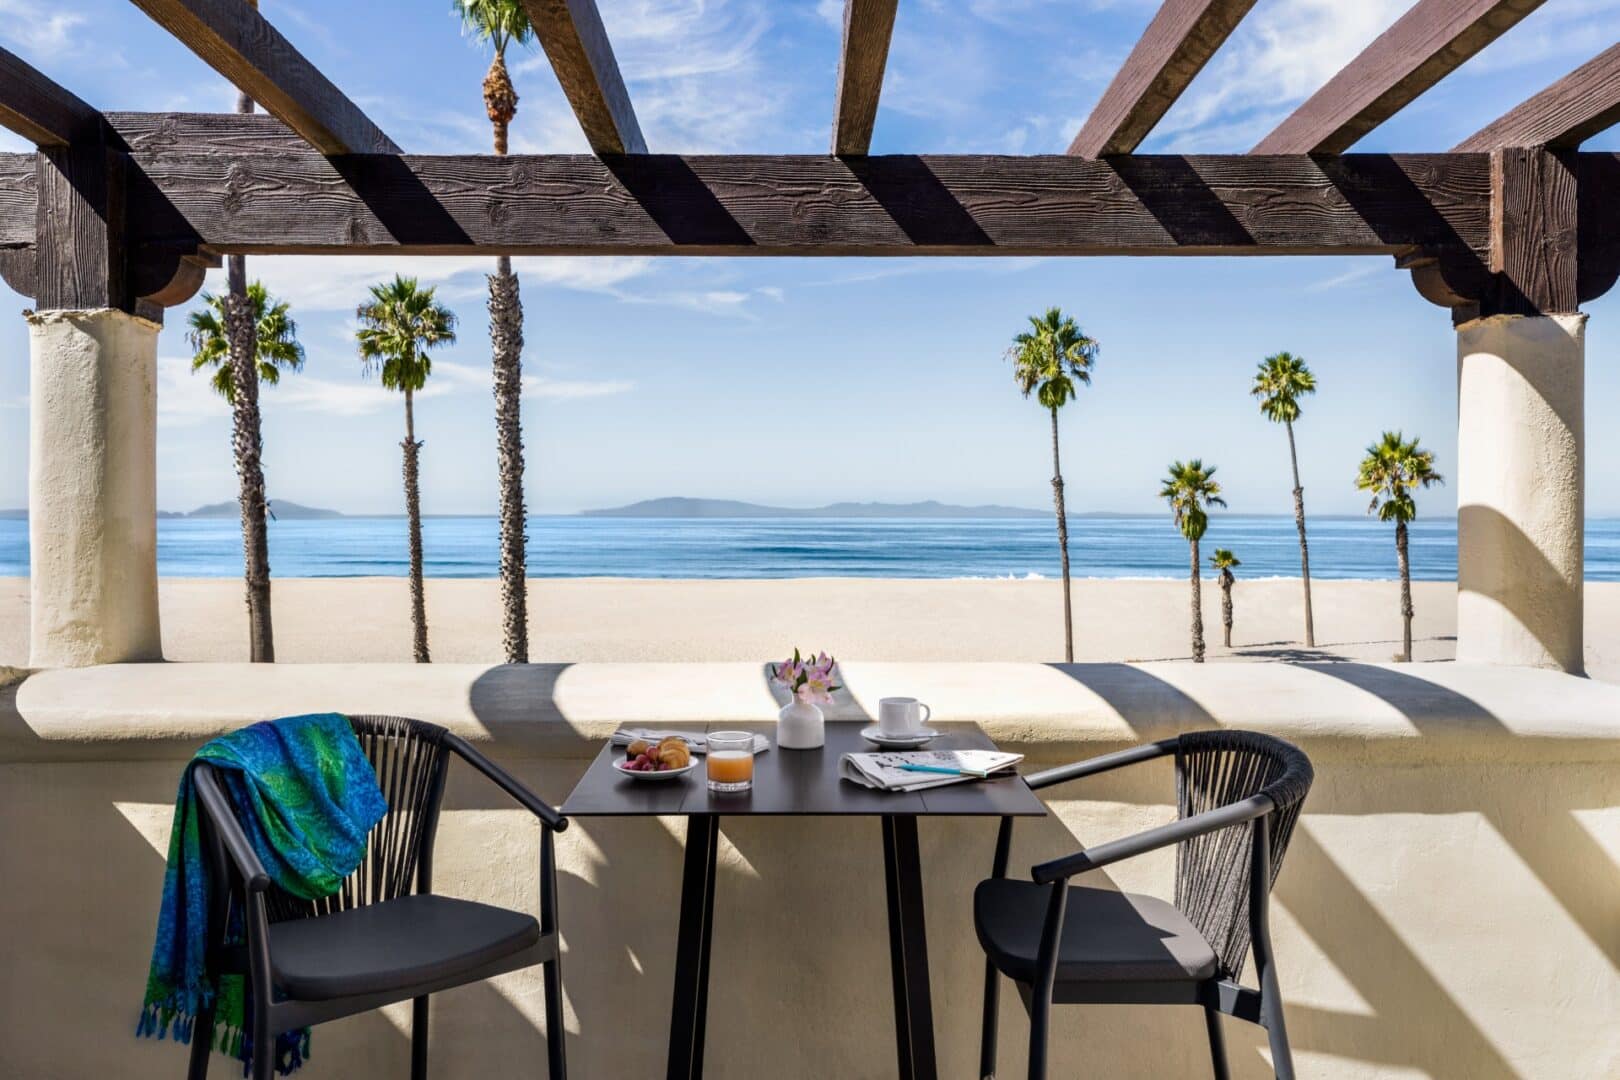 Hotels, Motels, and Places to stay in Ventura County Coast. 